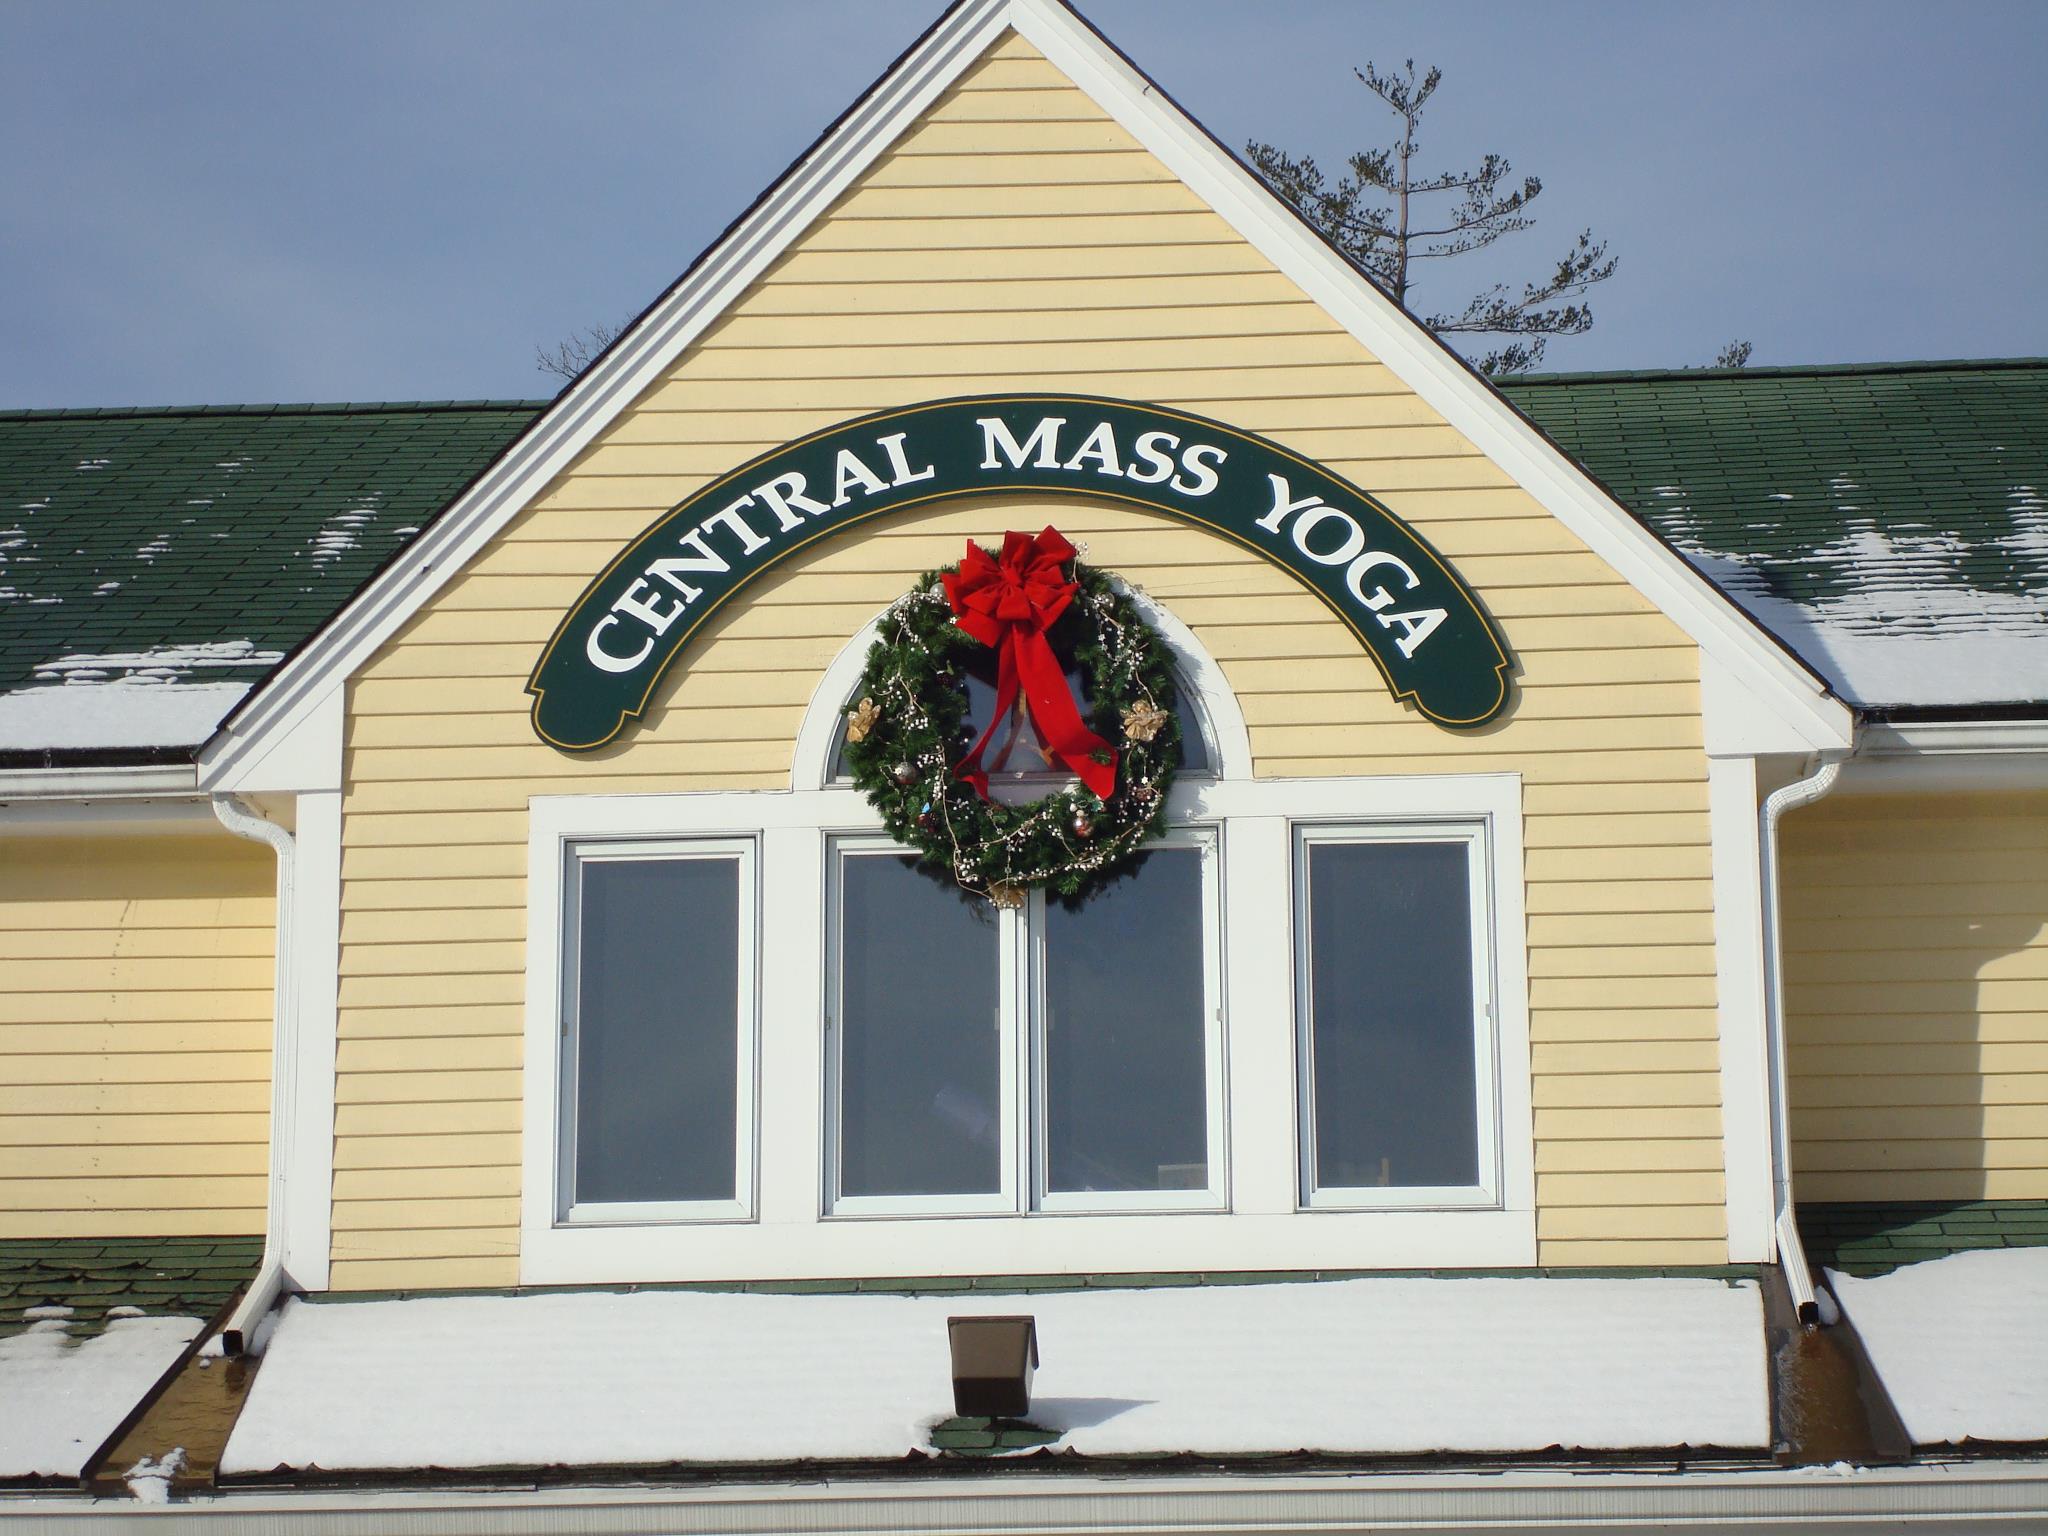 Central Mass Yoga and Wellness